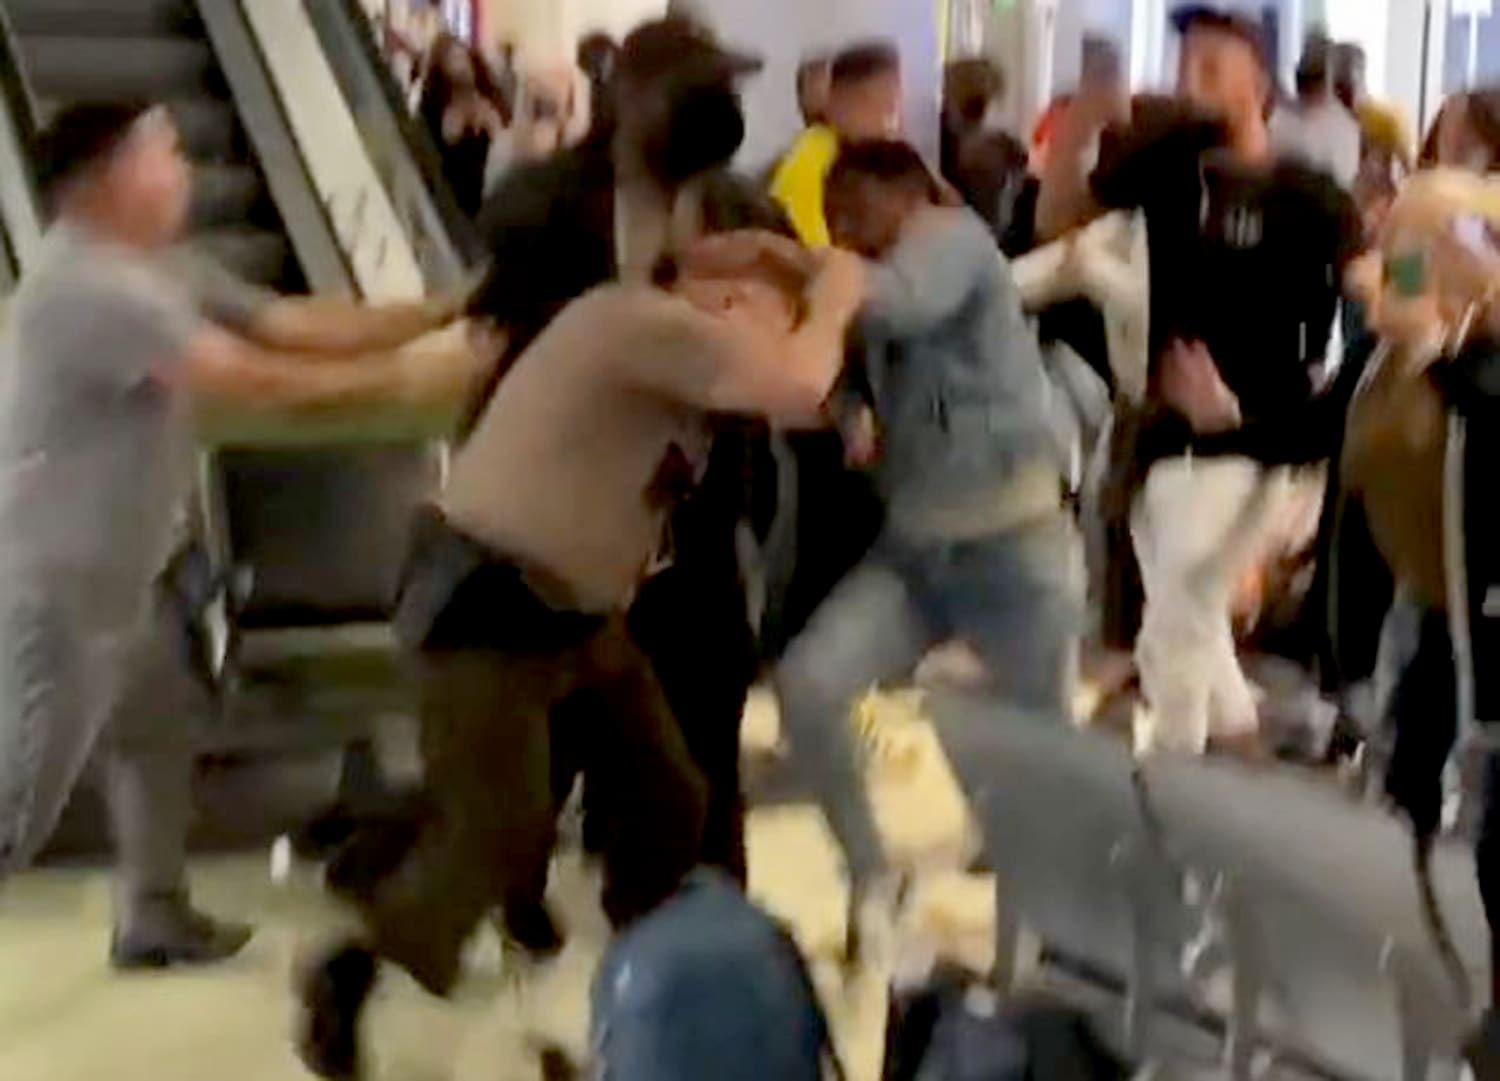 Brawl breaks out at Miami International Airport; two in custody